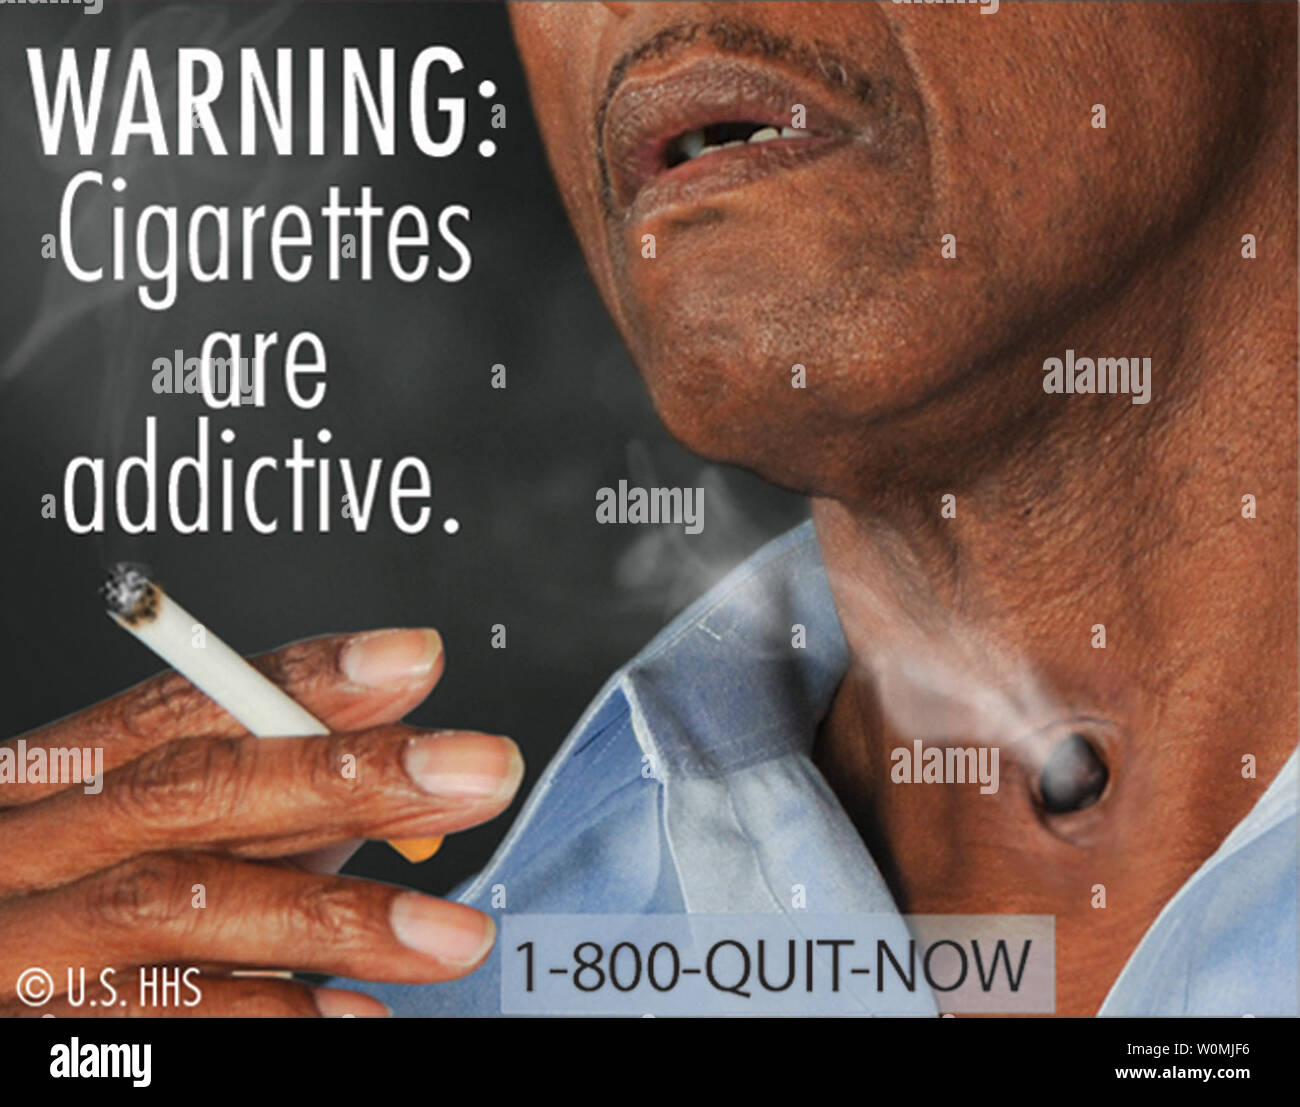 This Fda Image Released On June 21 2011 Shows One Of The New Proposed Cigarette Warning Labels